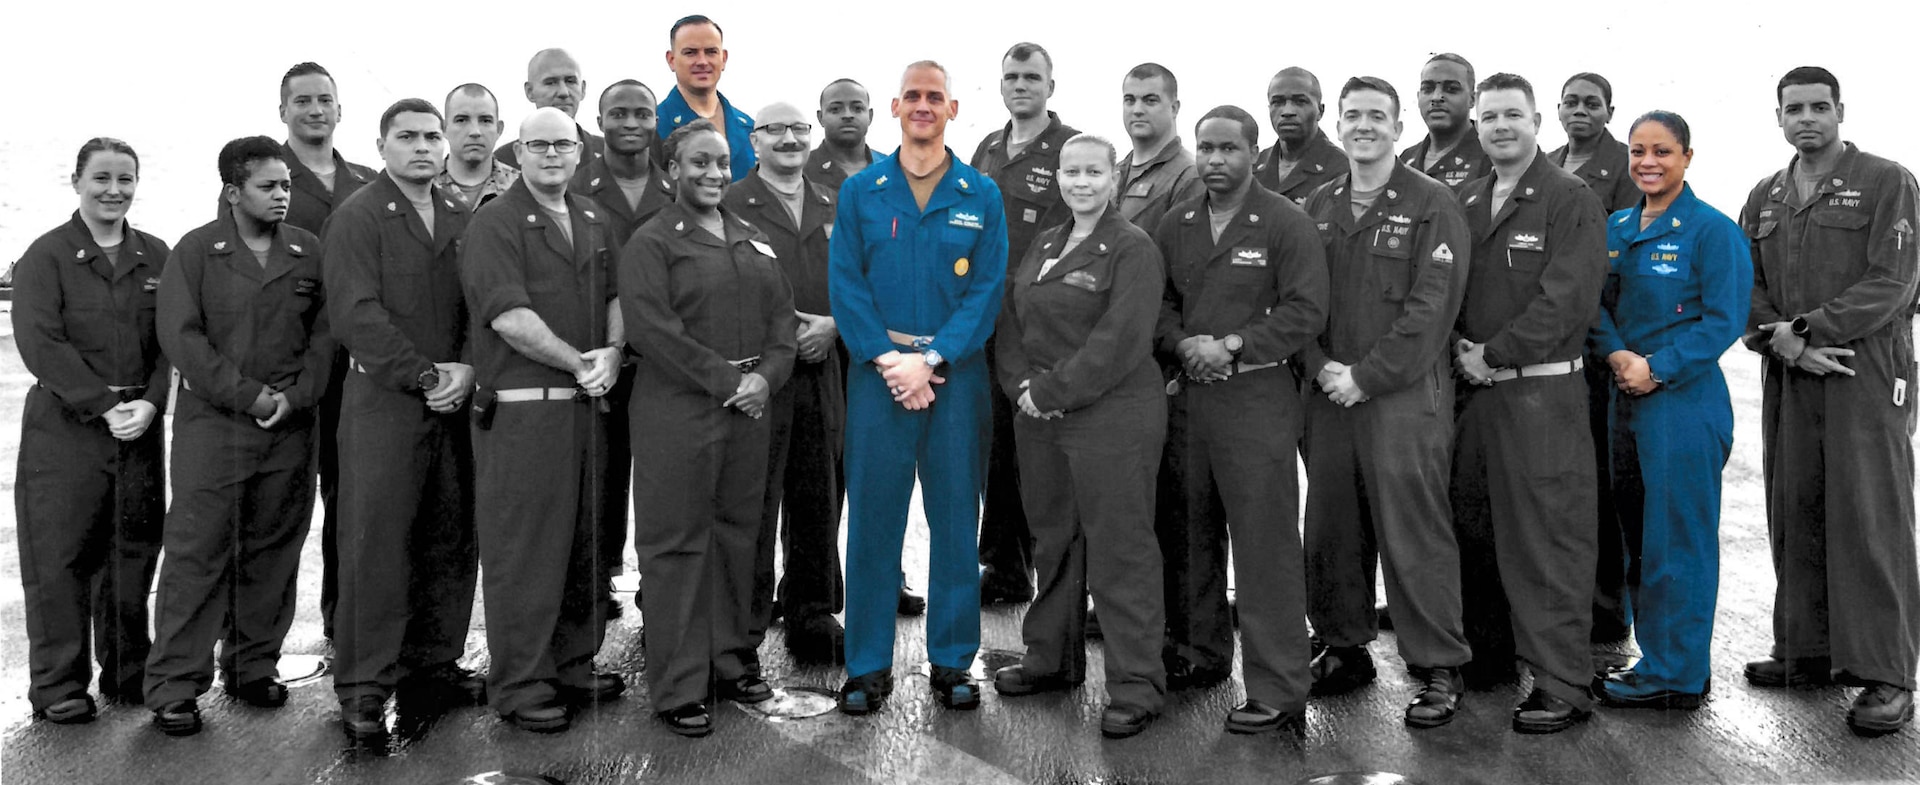 A group photograph of the USS Carter Hall chiefs mess. The individuals in color left to right are Senior Chief Brandon Majors, Master Chief Adam Singleton and Senior Chief Ioana Wolfinger.